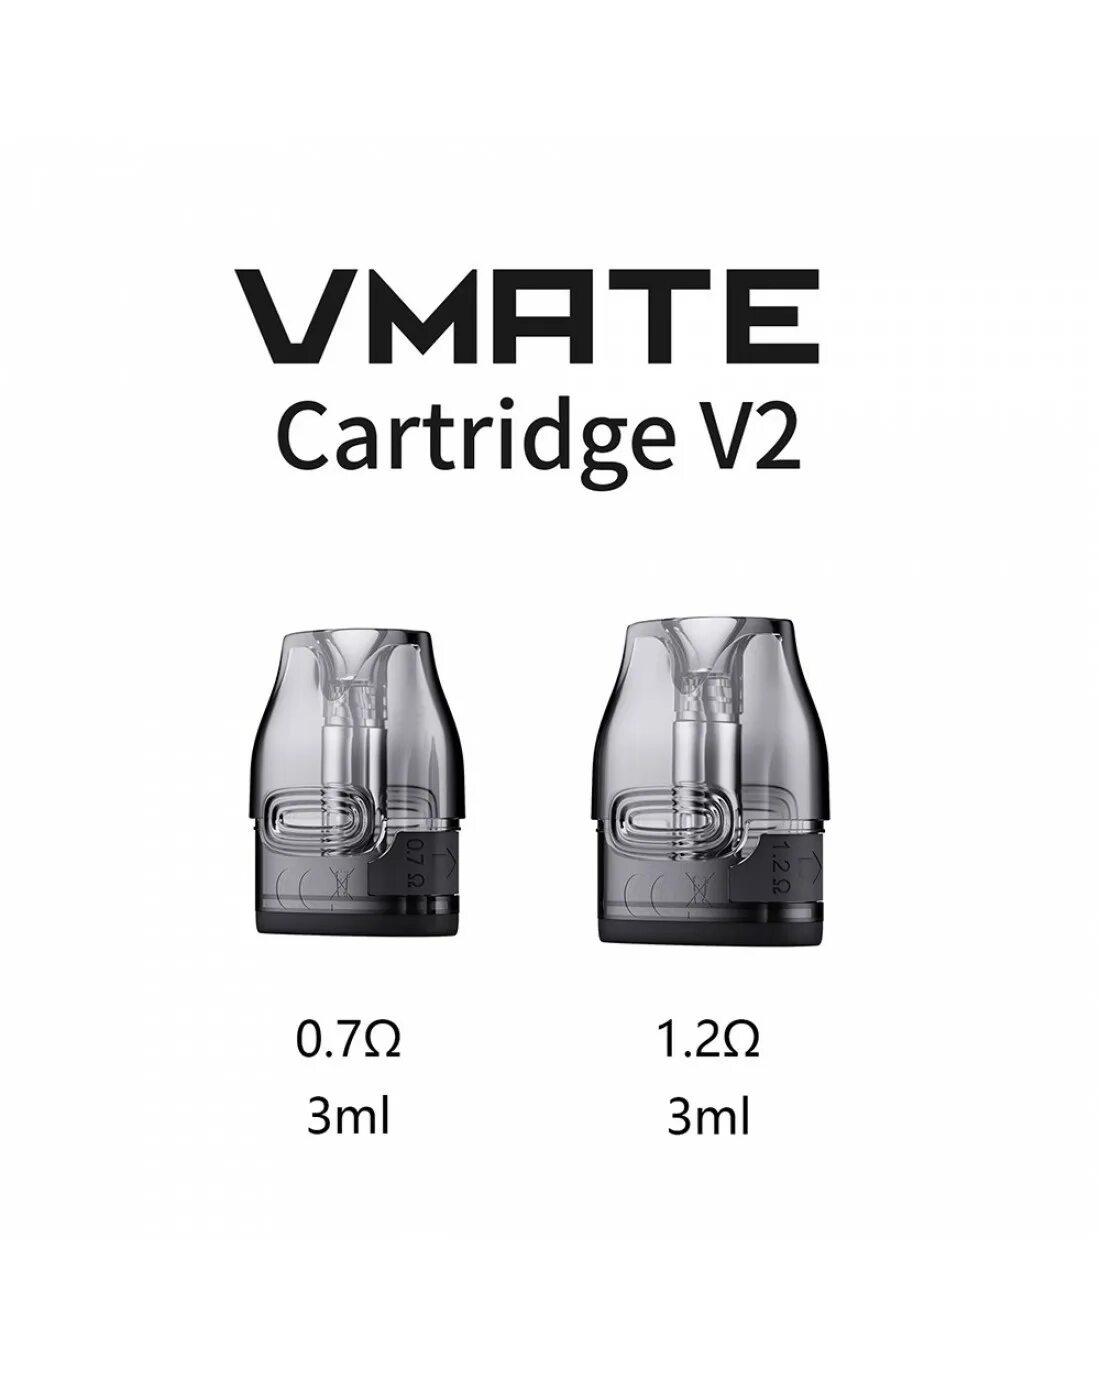 Картридж VOOPOO VMATE v2 0.7ohm. VMATE v2 1.2 ohm картридж. Картридж VOOPOO VMATE v2 (VMATE/VMATE E/V.thru Pro). Картридж VOOPOO VMATE 0.7.